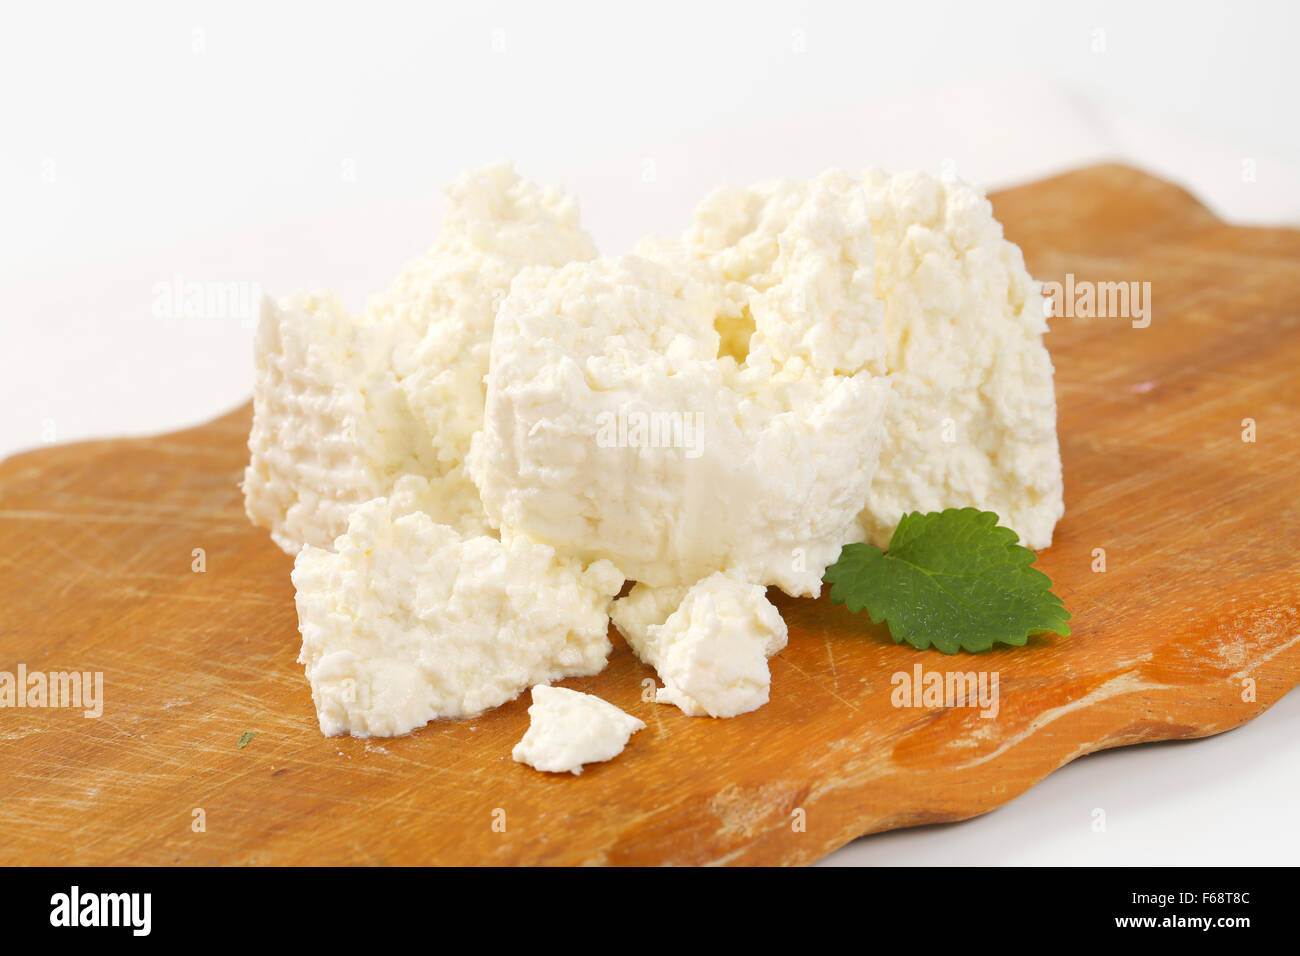 slices of fresh curd cheese on wooden cutting board Stock Photo